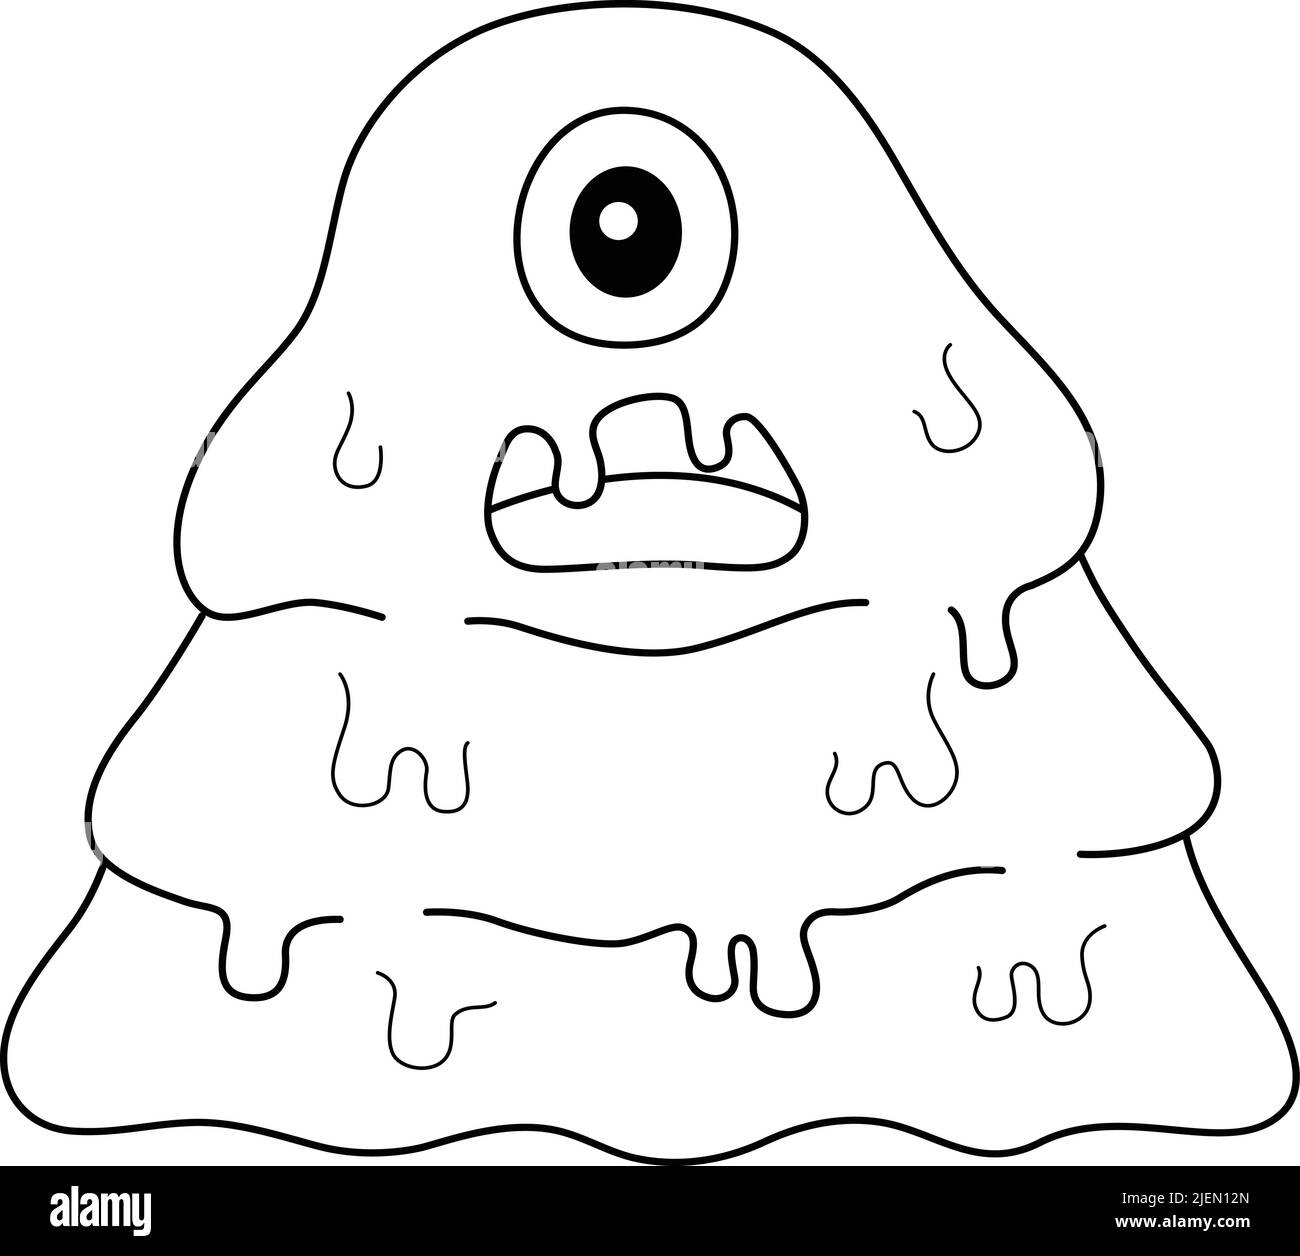 Monster Slime Coloring Page for Kids Stock Vector